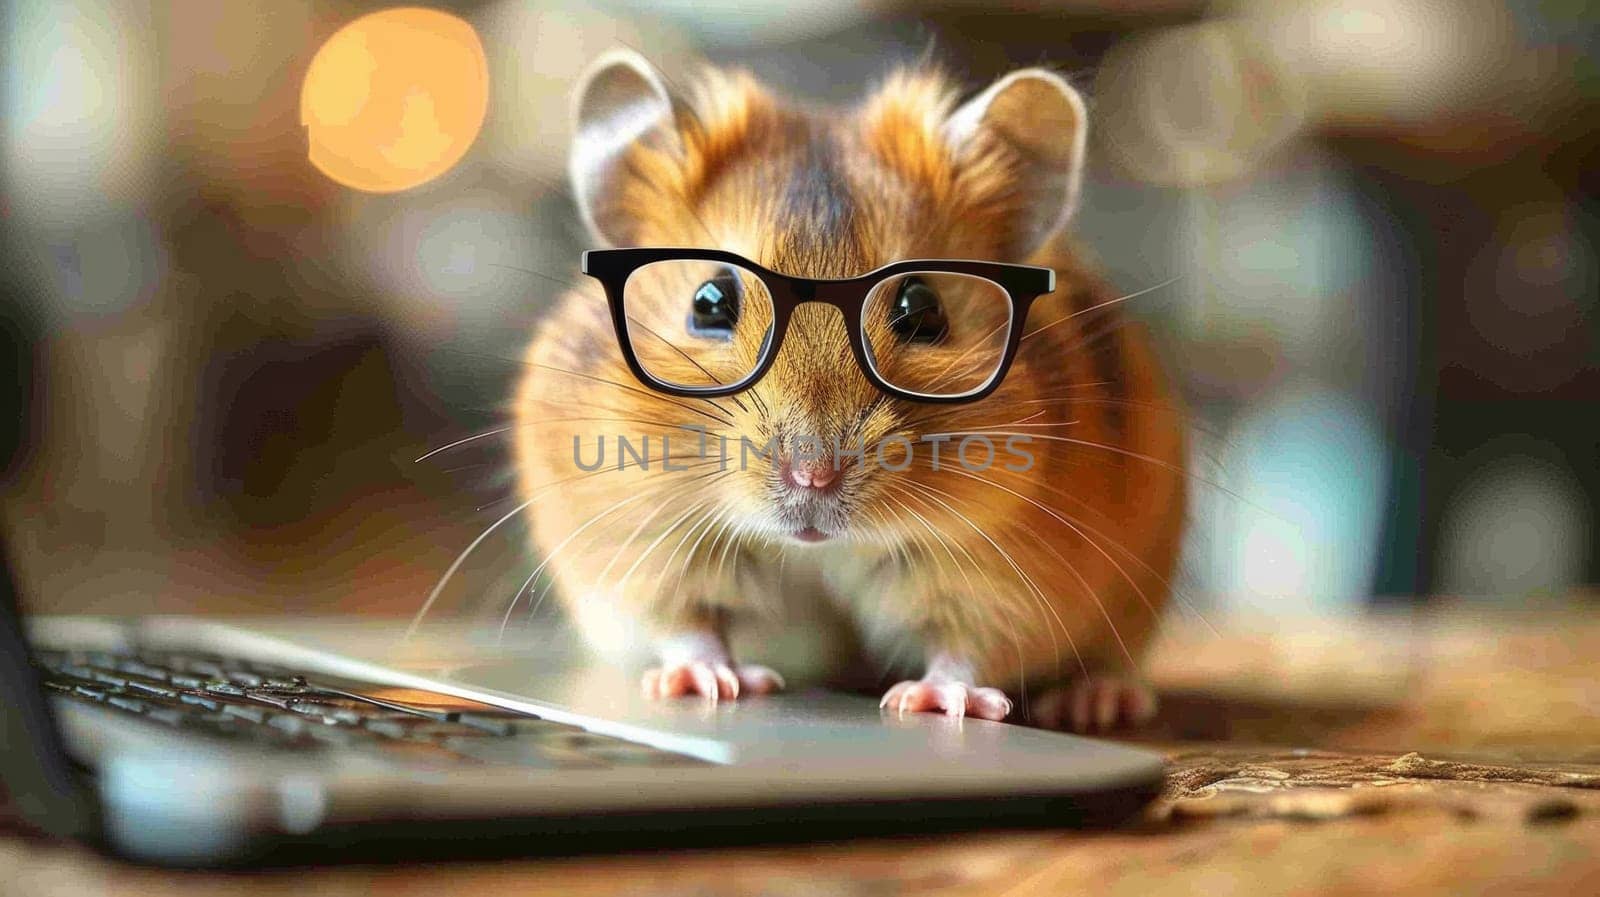 A small mouse wearing glasses on a laptop computer, AI by starush